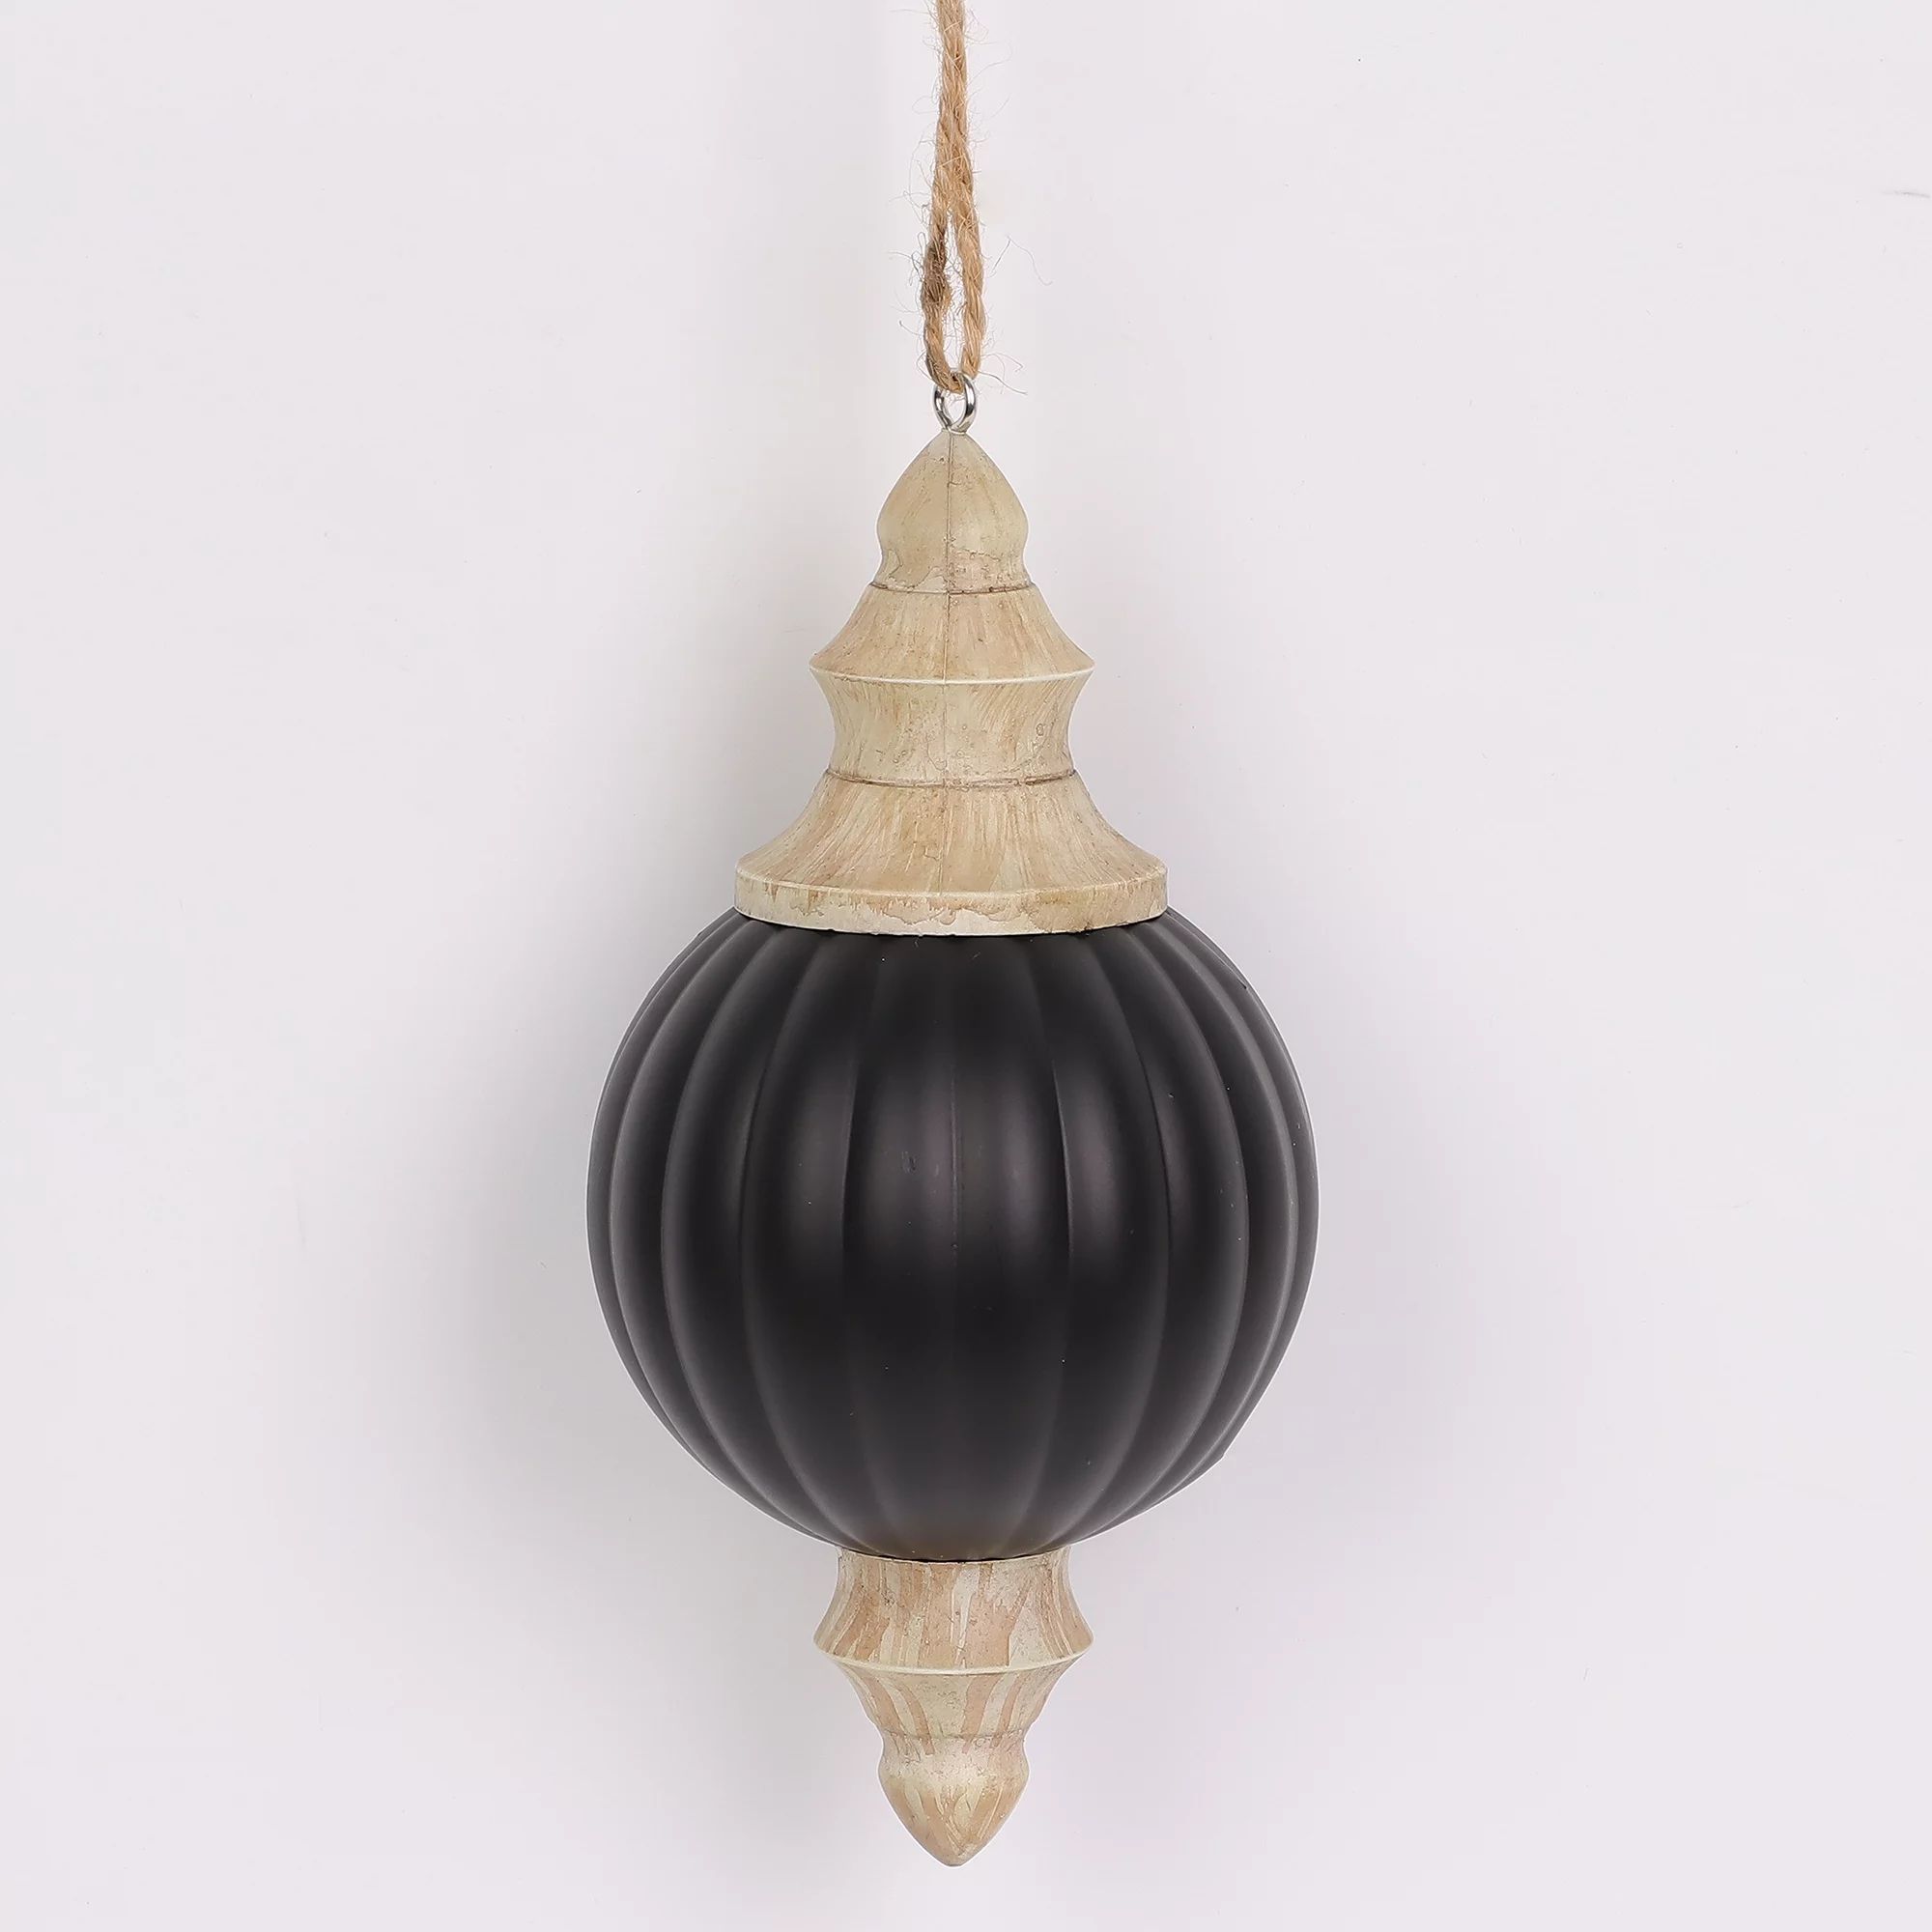 Finial Ornament, Black, 6", by Holiday Time | Walmart (US)